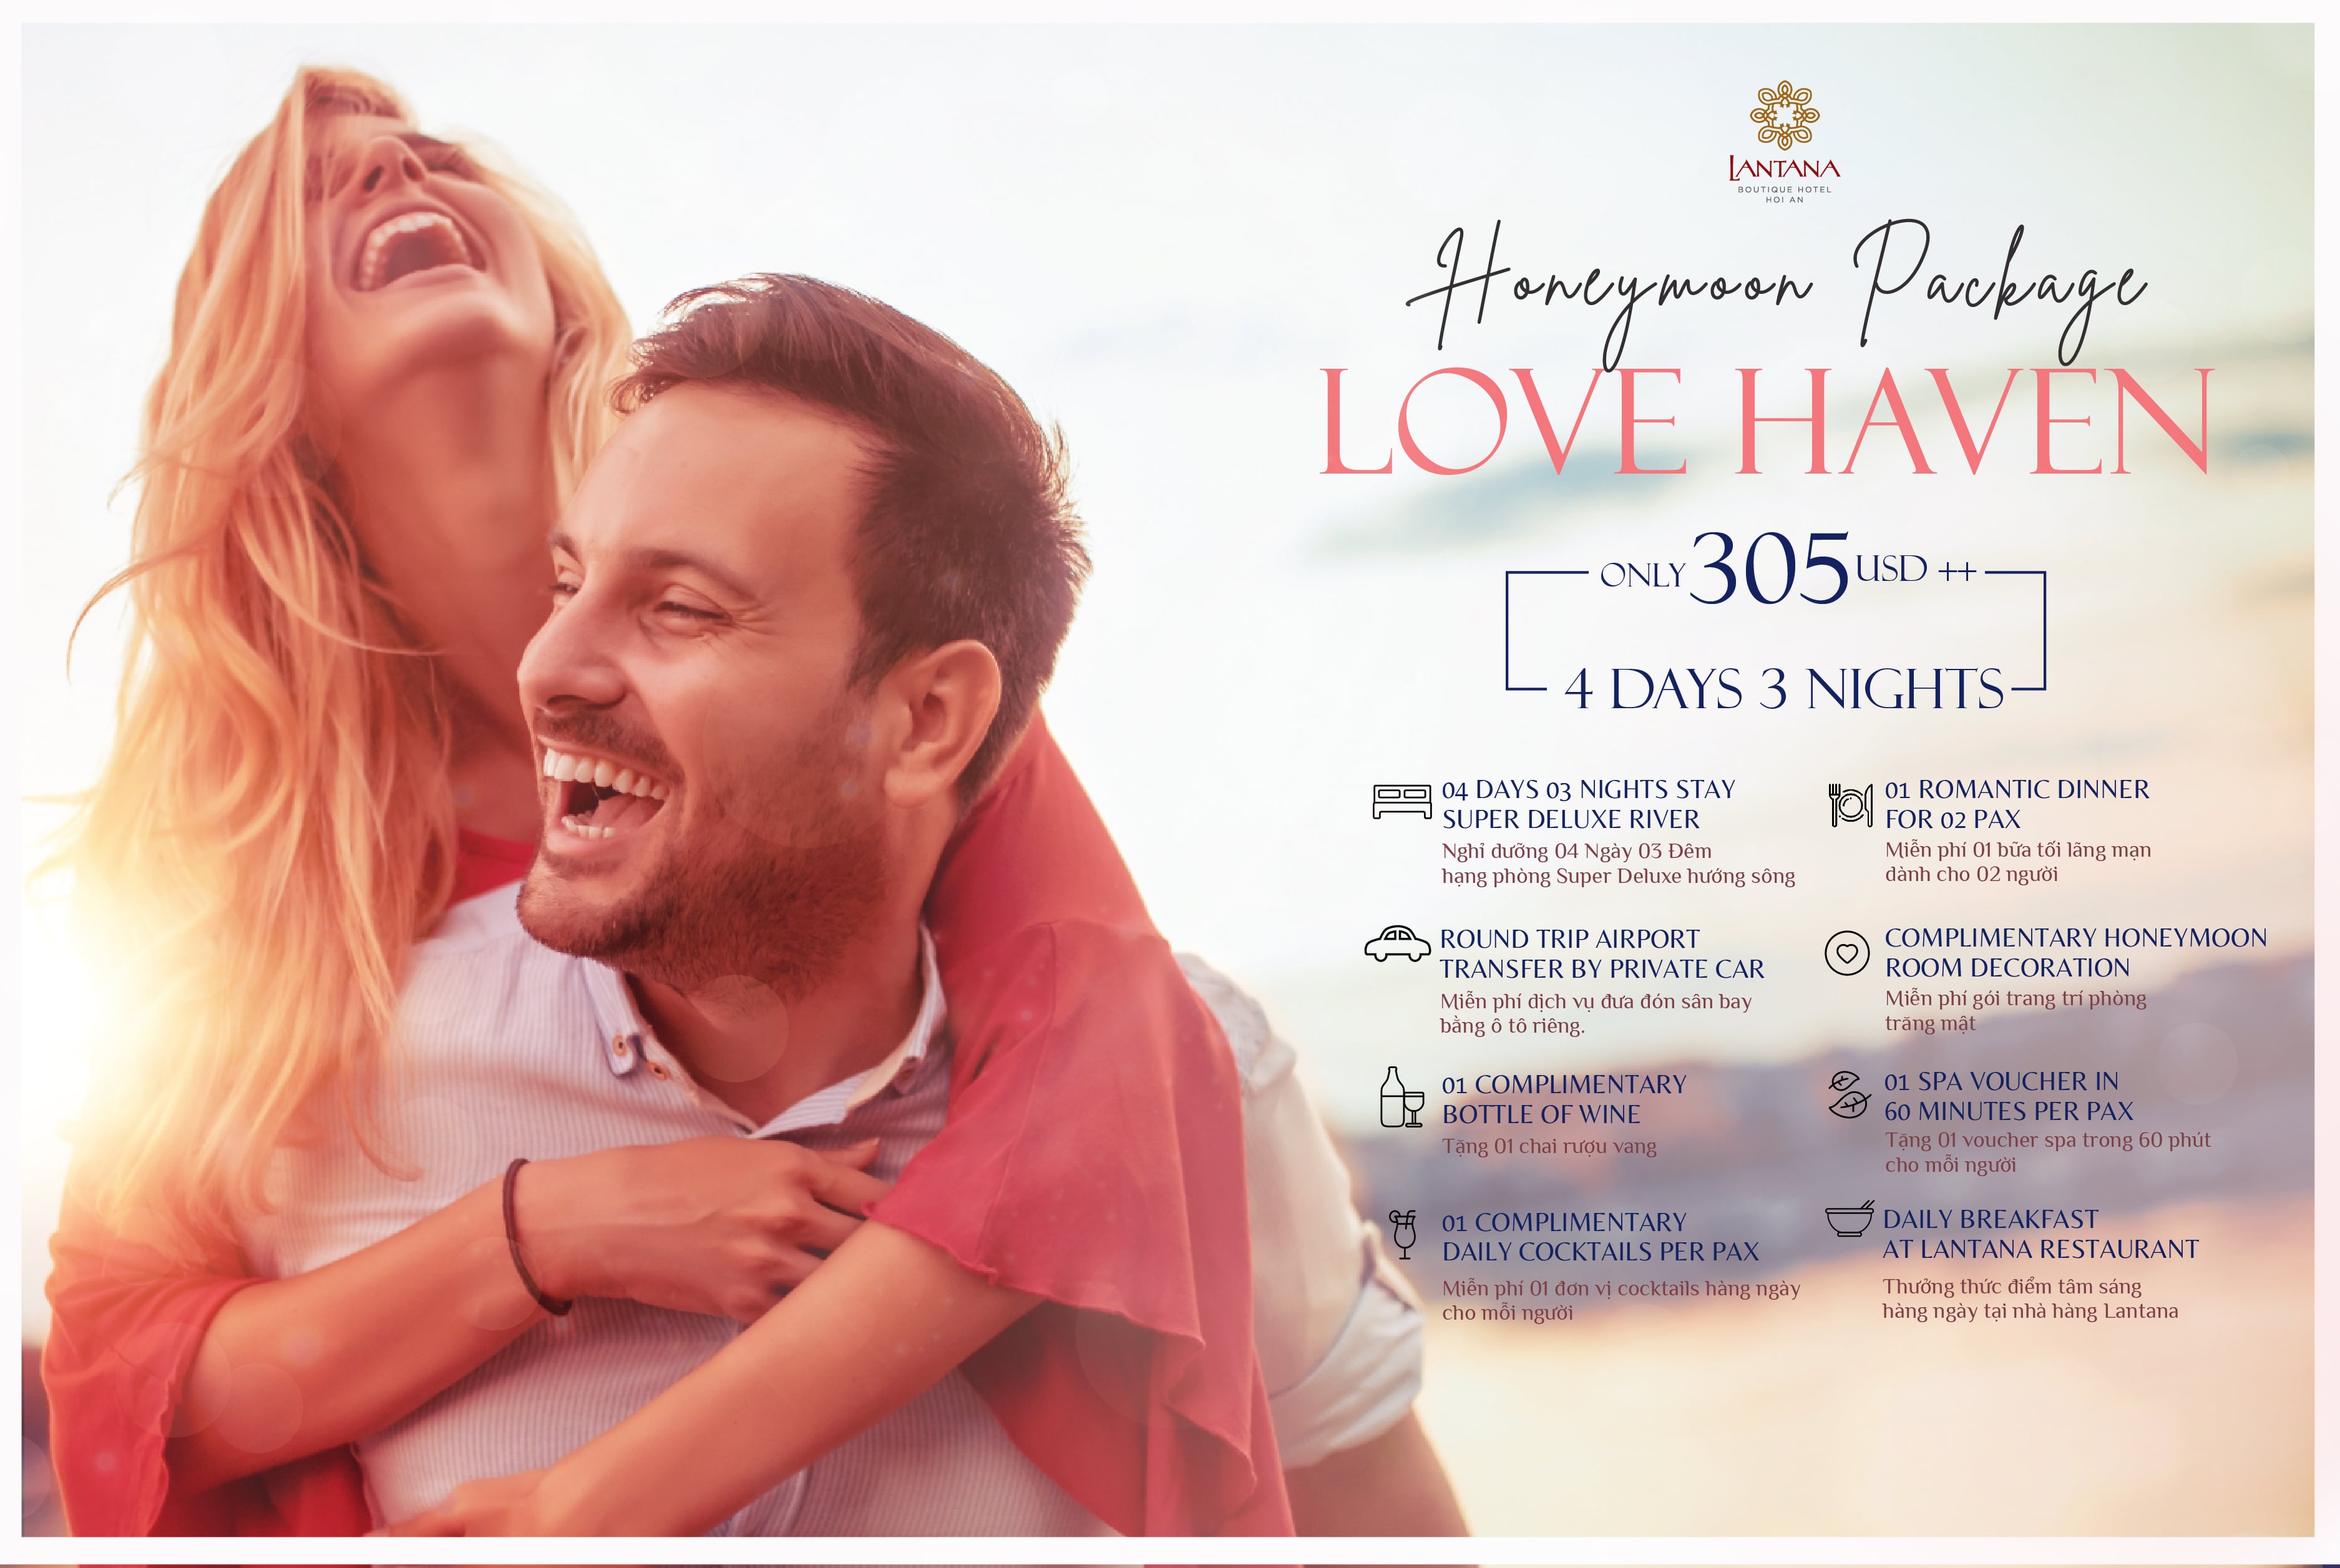 HONEYMOON PACKAGE - 4 Days 3 Nights Only 305USD++